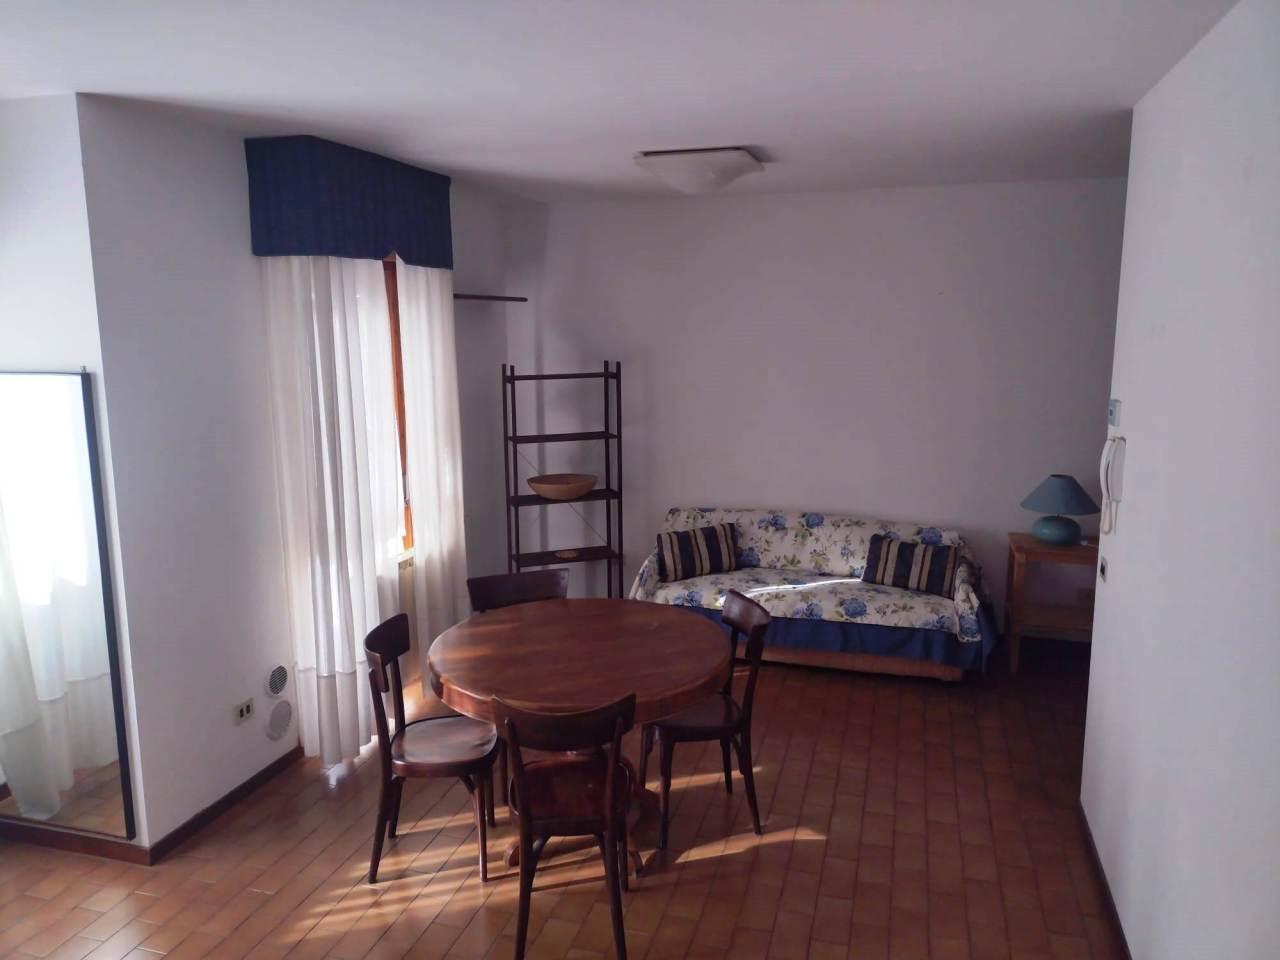 Rent Roomed, Parma foto